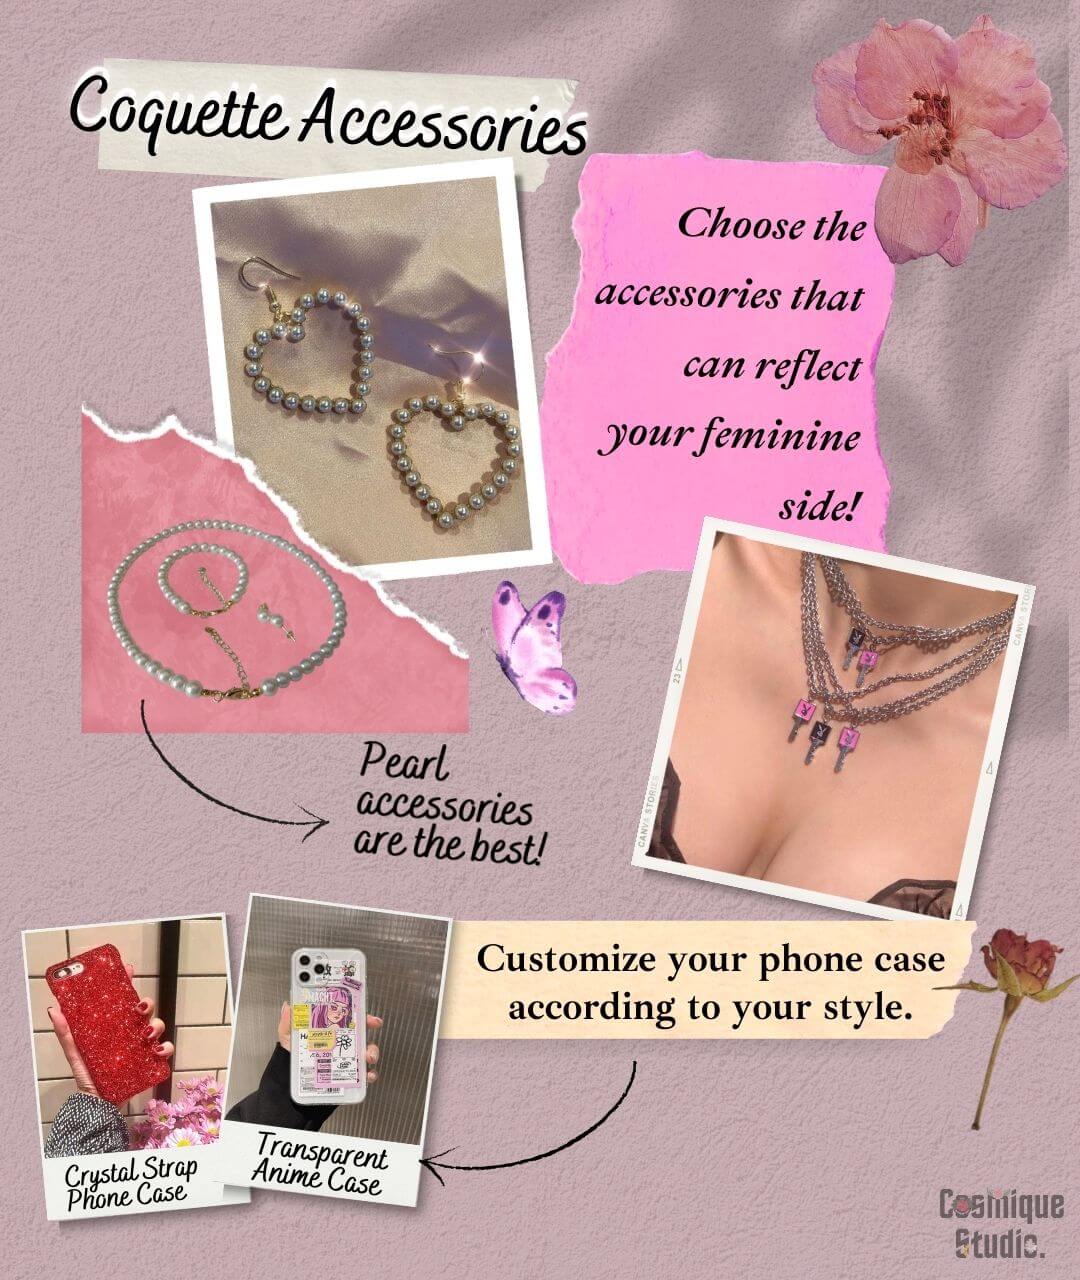 Coquette accessory ideas to show femininity such as pearl jewelry, customized phone cases